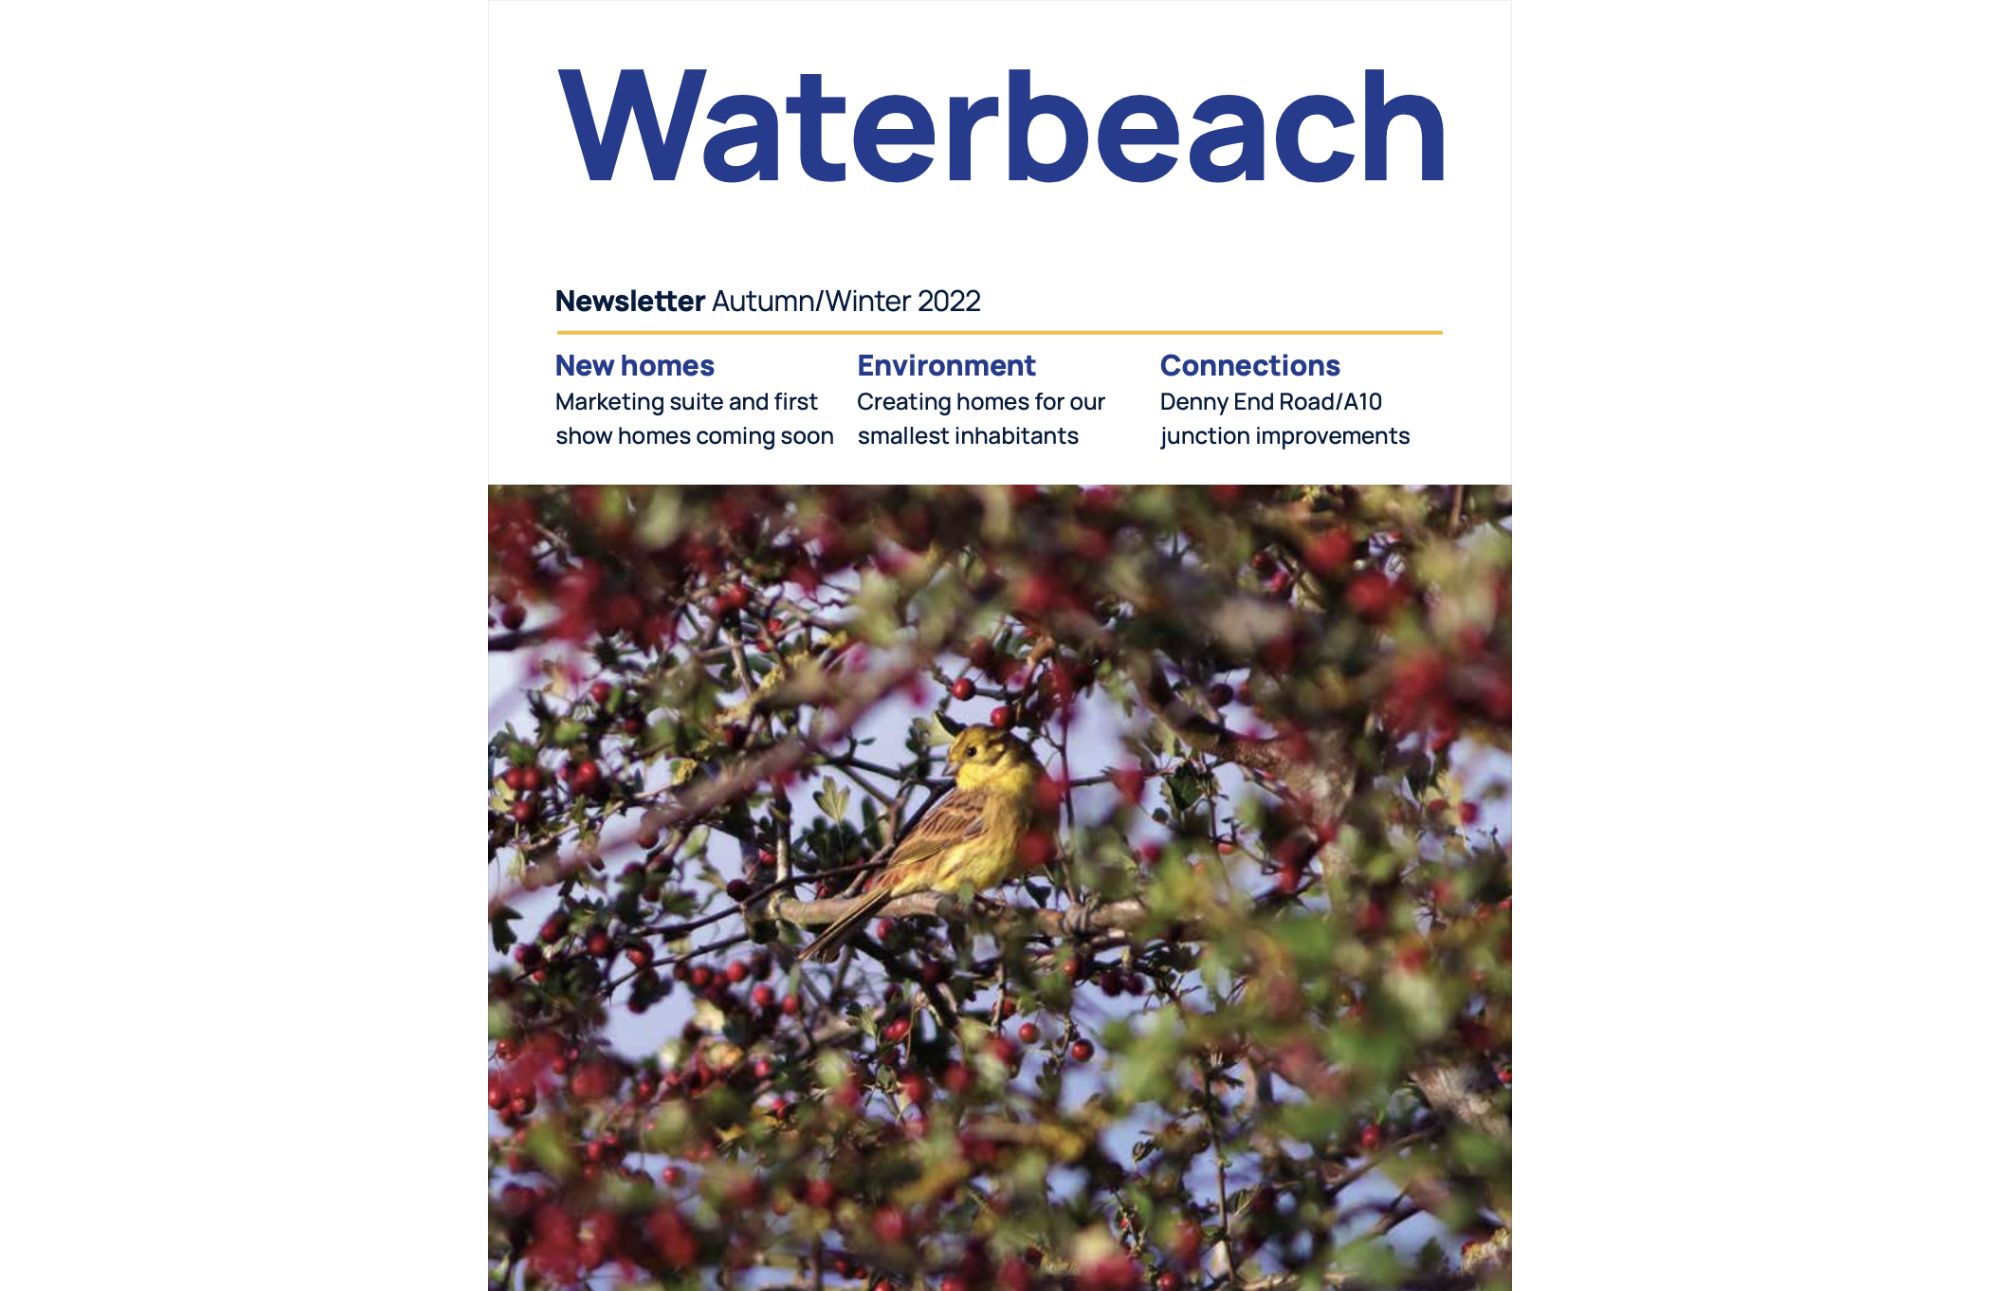 waterbeach-newsletter-cover-Autunm-Winter-2022.